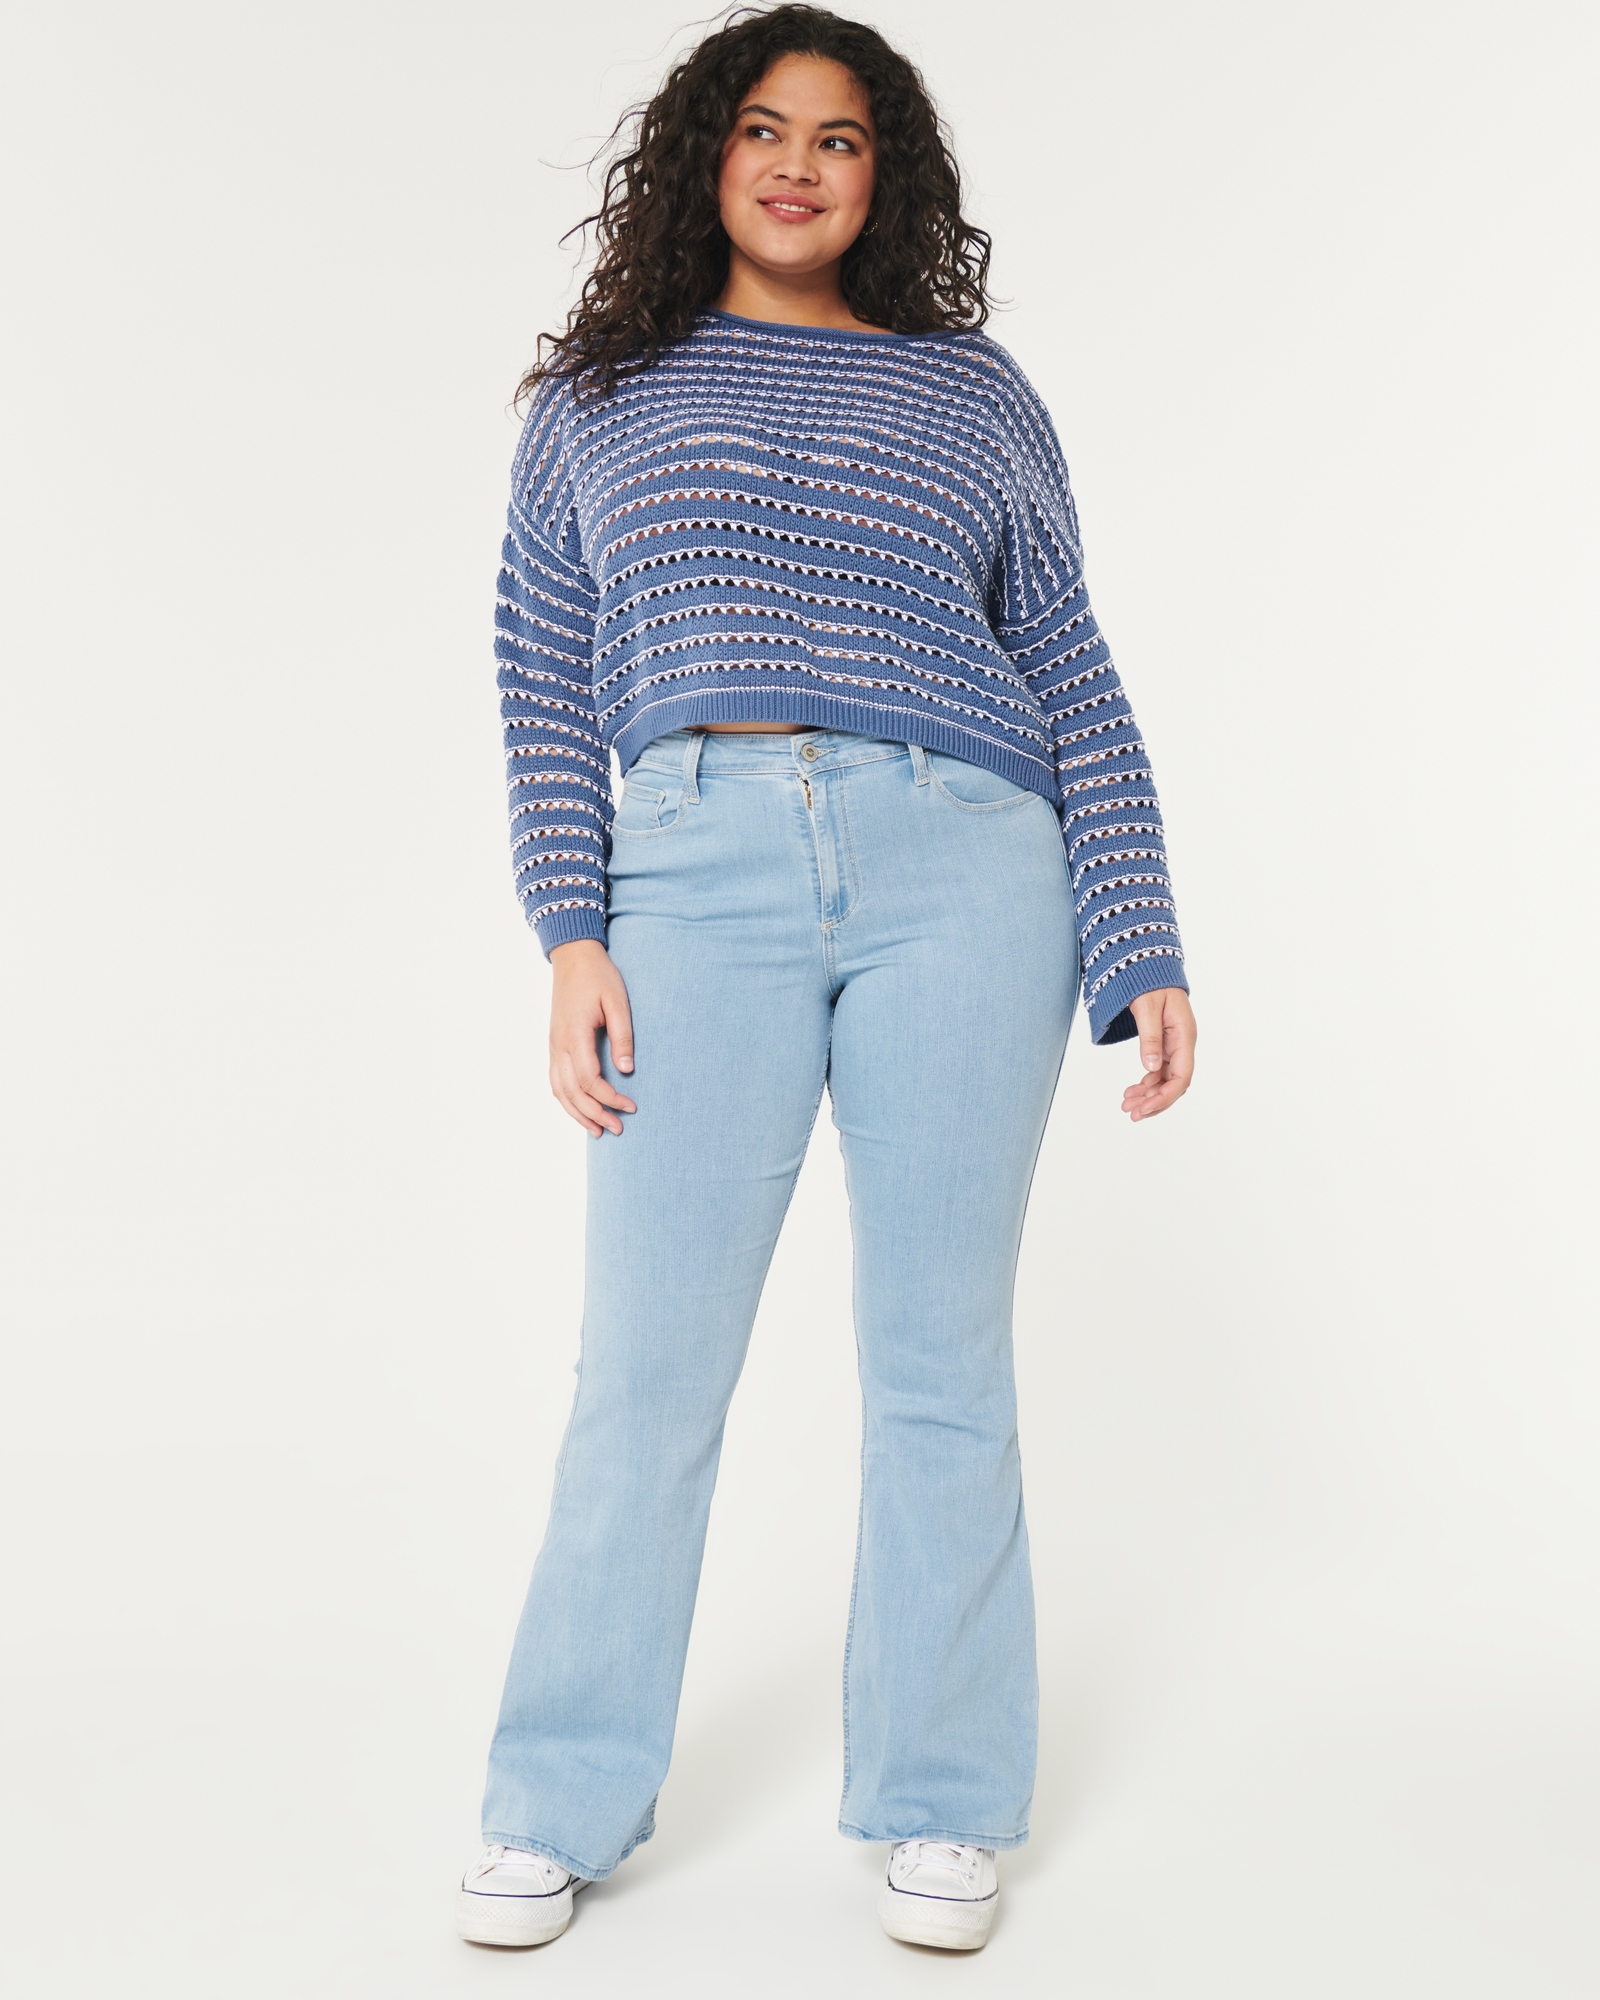 The Janie Flare Jeans in Medium Wash - Curvy